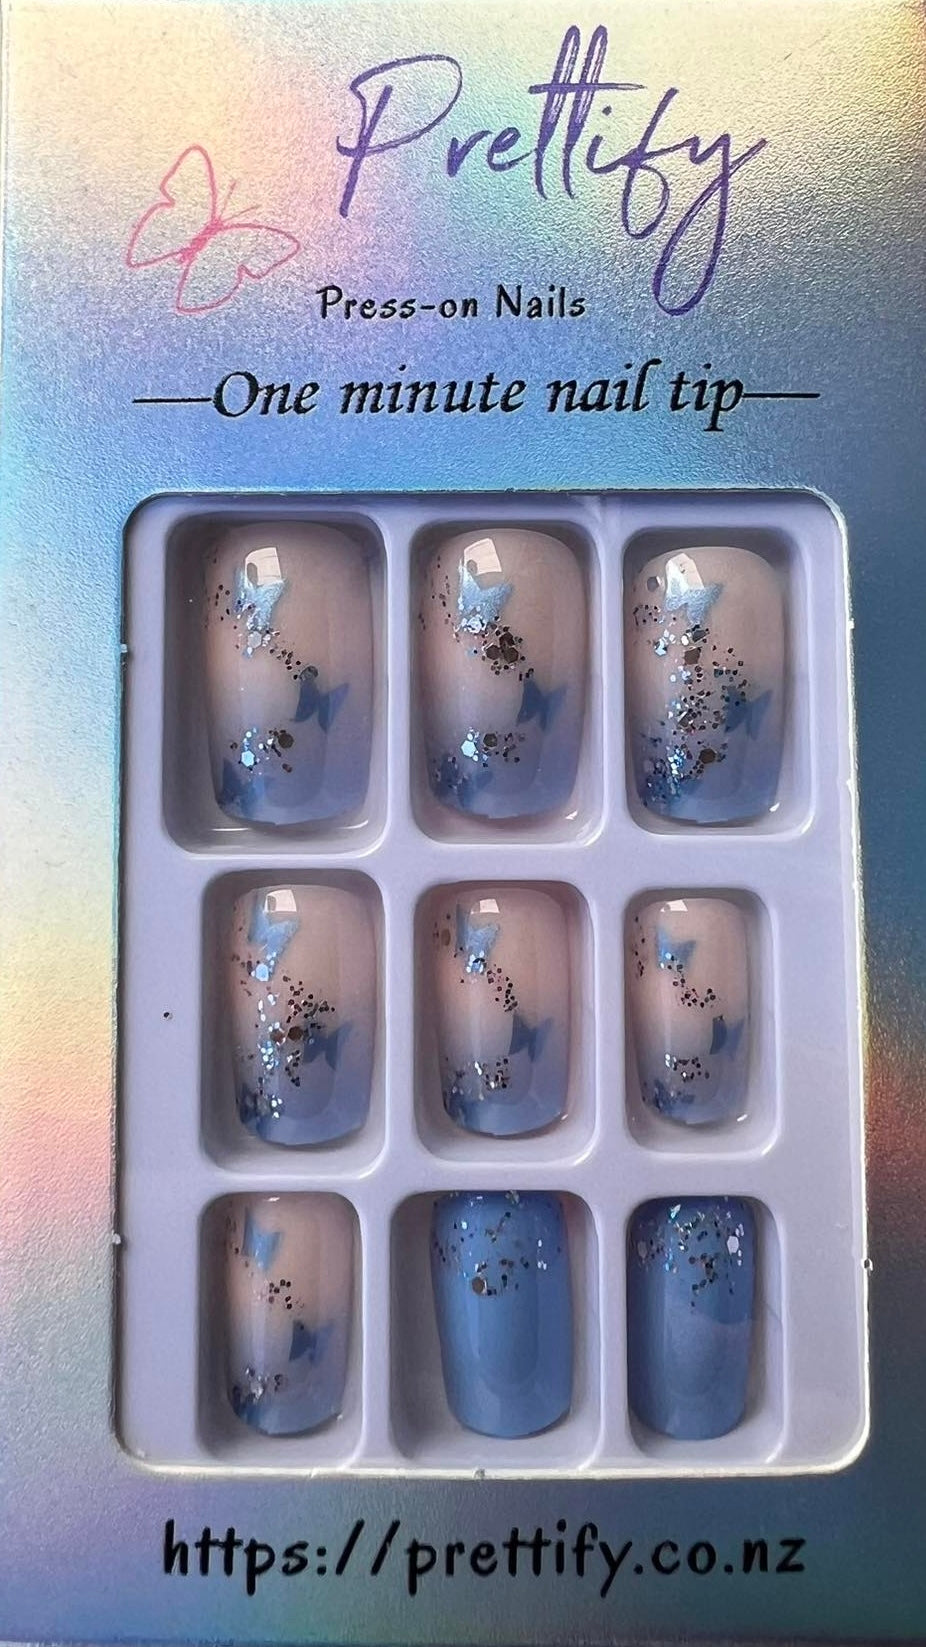 Squoval Press on Nails. Blue with Butterflies & Glitter. Durable Acrylic Press on Nails. Easy and quick to apply. Great for those special occasions, parties or add an edge to any outfit. Gorgeous, flattering and you can re-use them again and again.